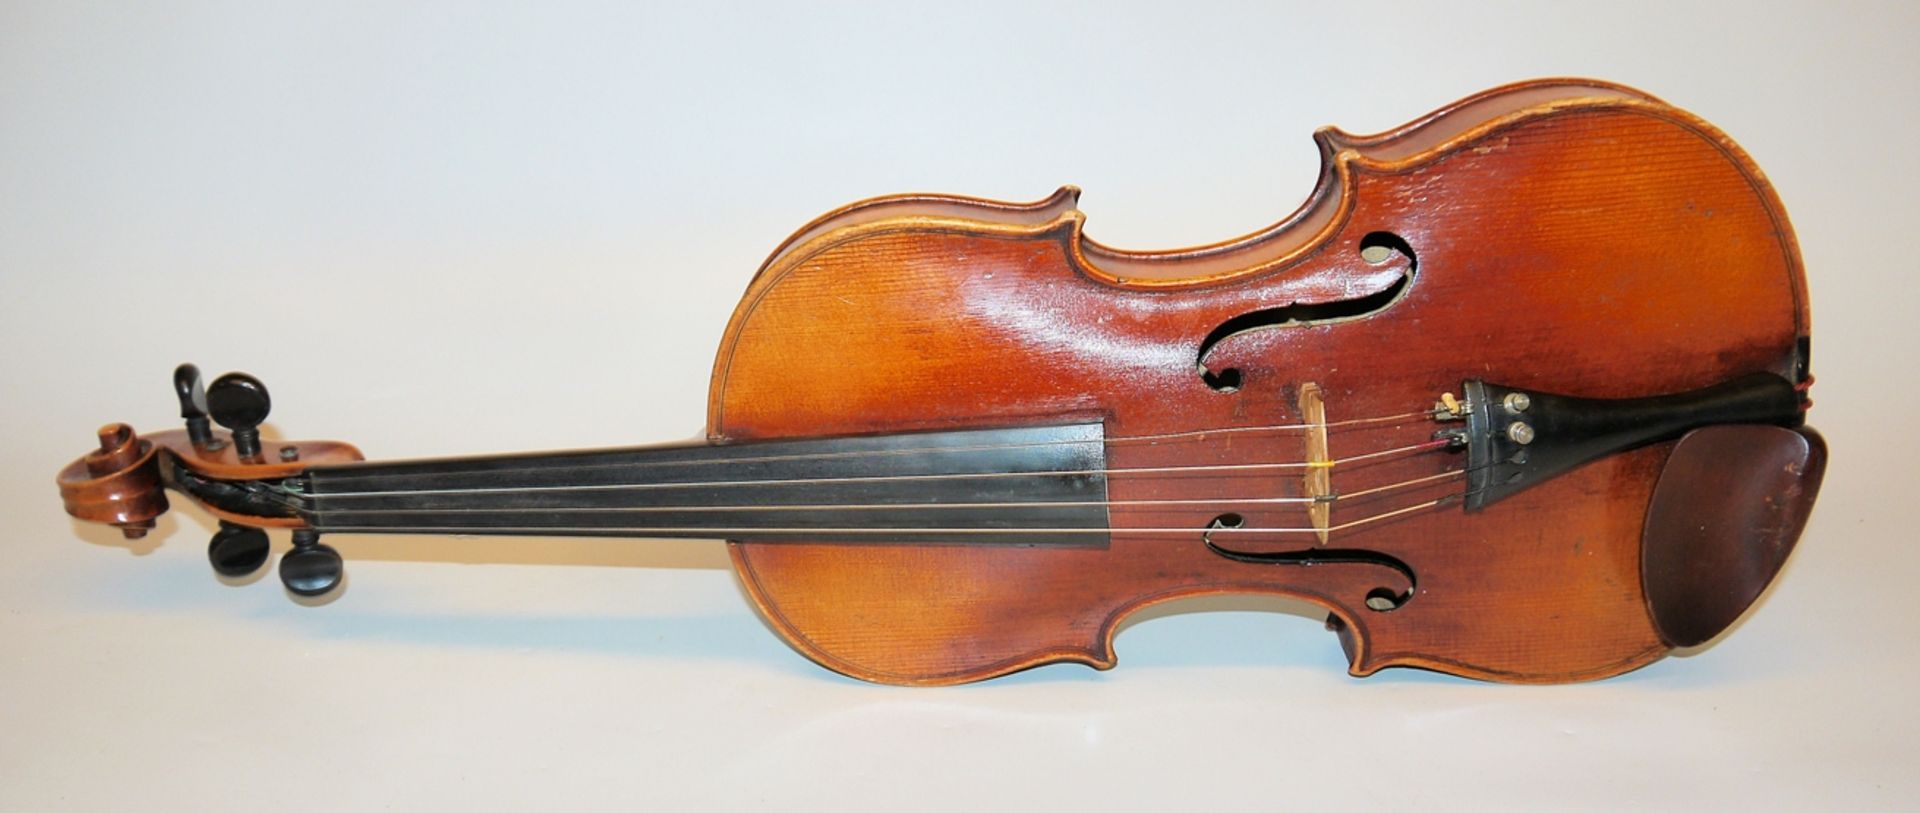 Playable violin, probably Mittenwald, 1st half 20th century - Image 2 of 5